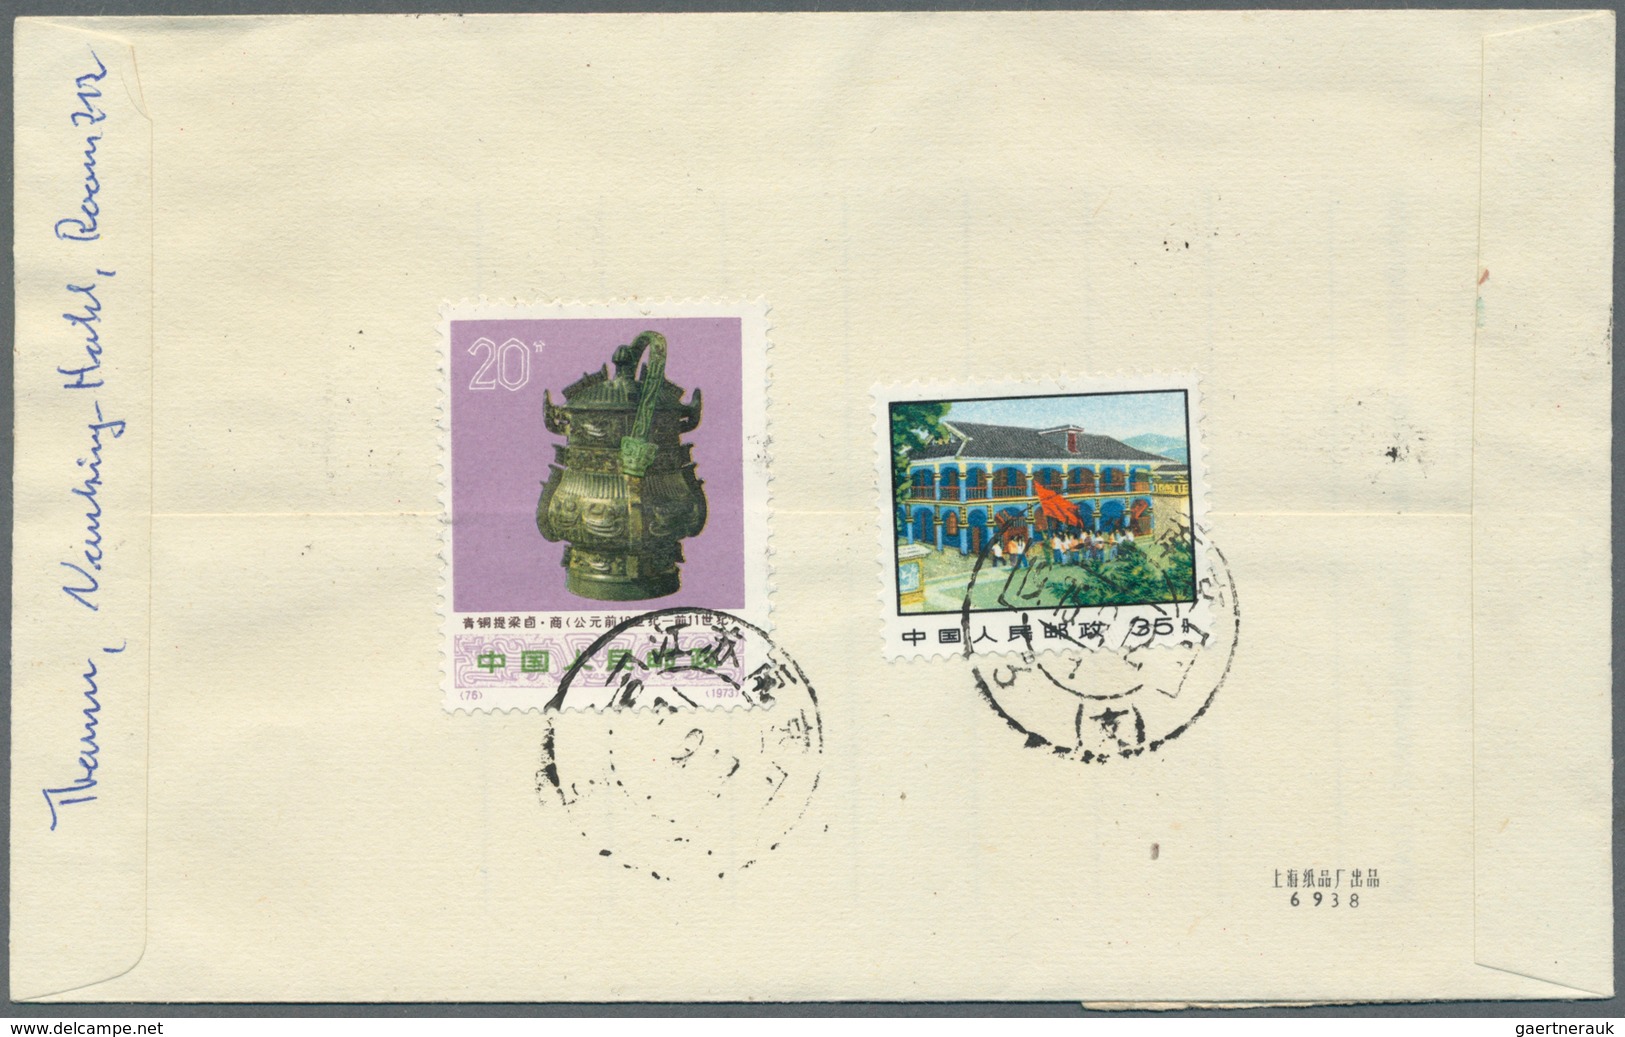 08311 China - Volksrepublik: 1959/62, national sports meeting set C72 on four registered covers used "Nank